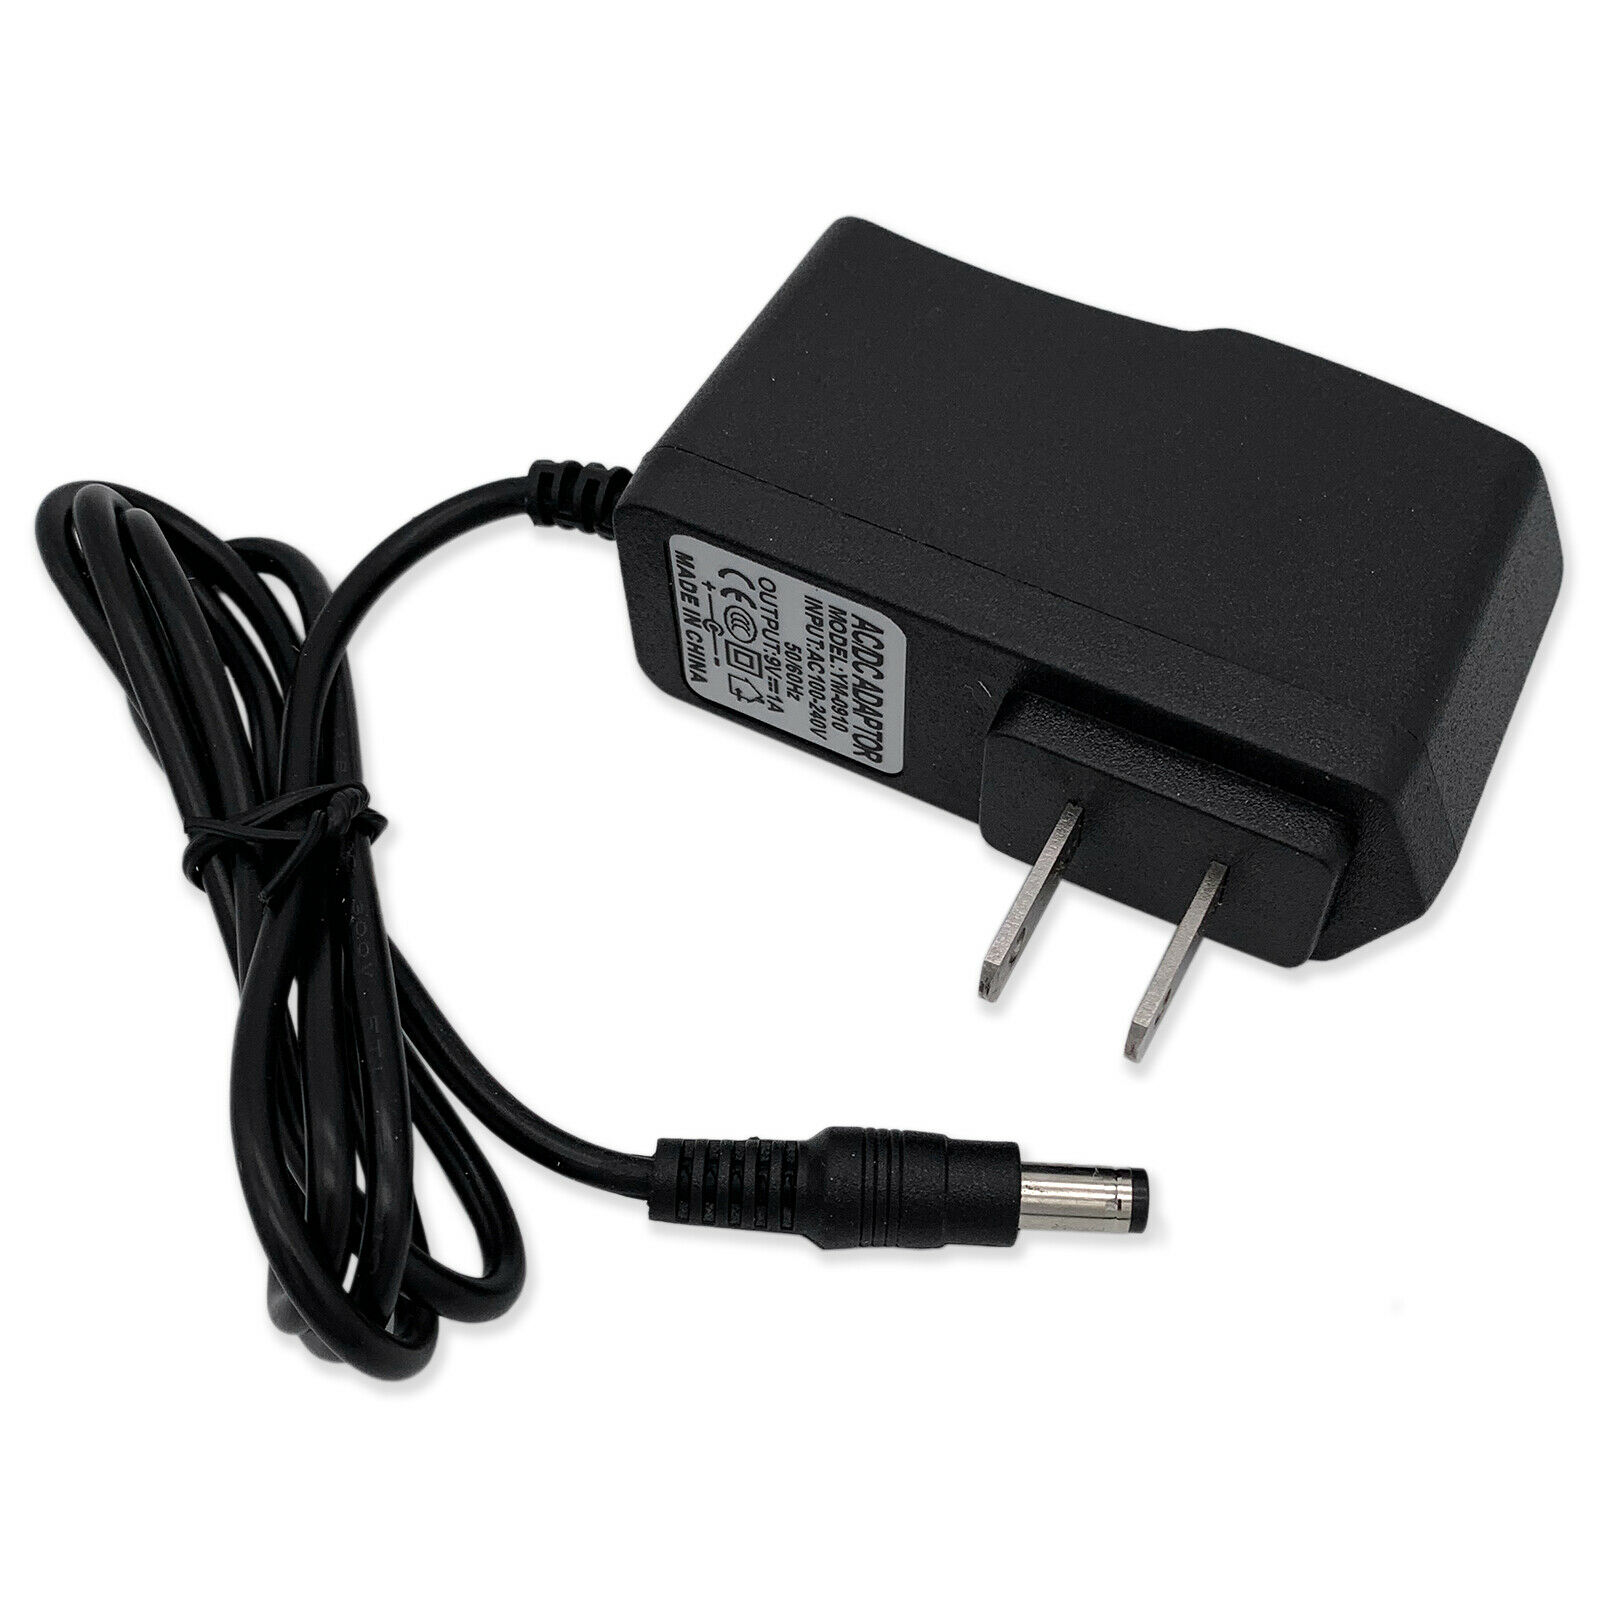 *Brand NEW*For Brother AD-24 AD-24ES LABEL PRINTER Power Supply 9V AC/DC Adapter Charger